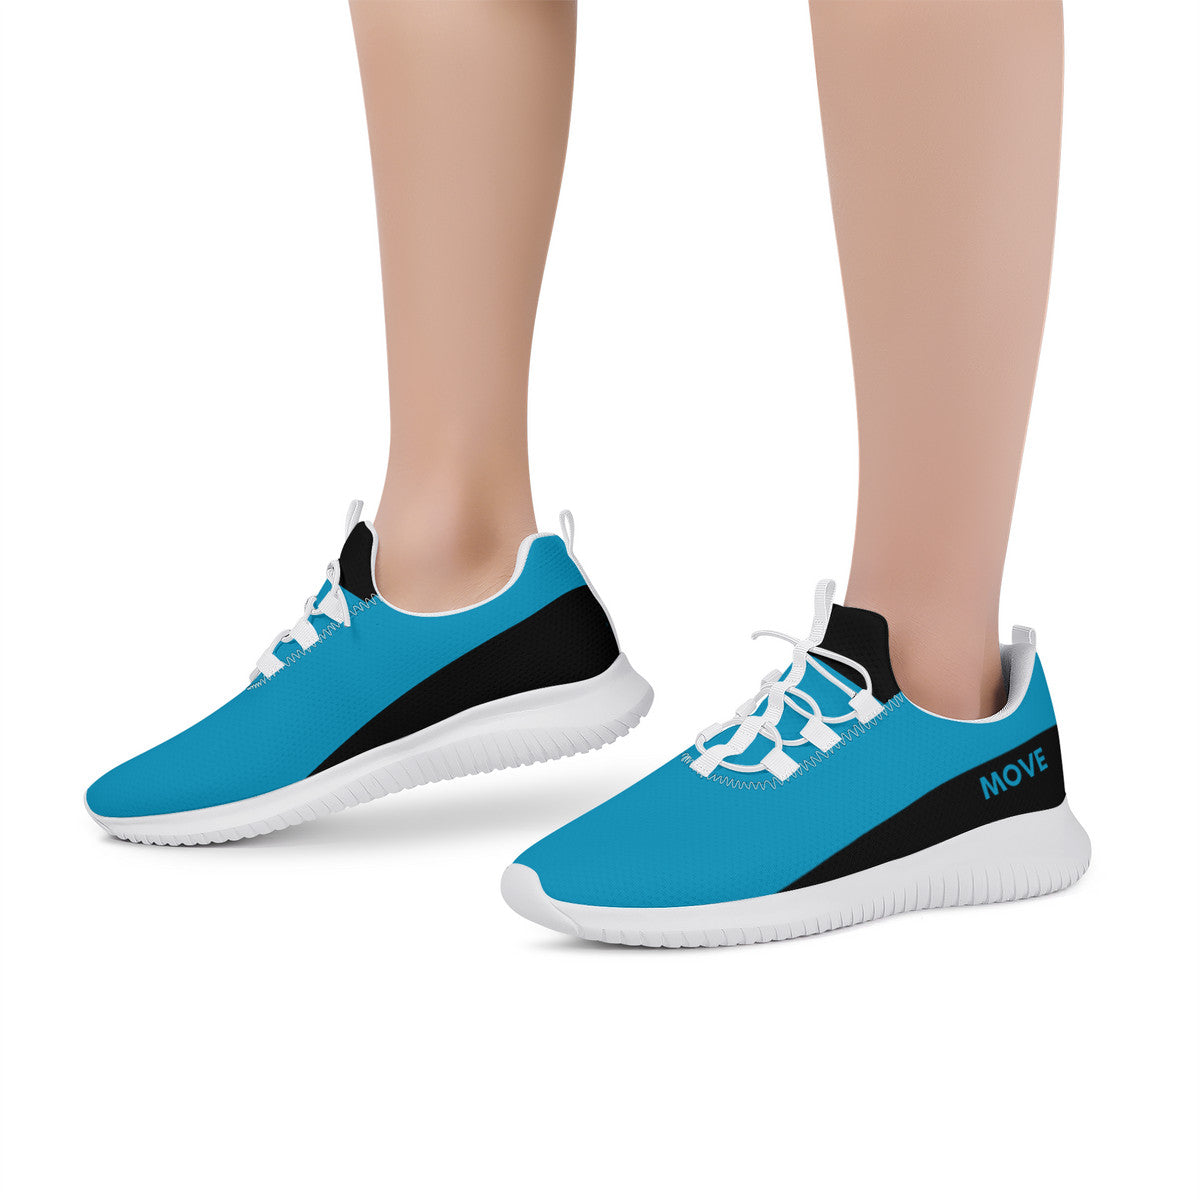 Fitness Sneakers - Move - Blue